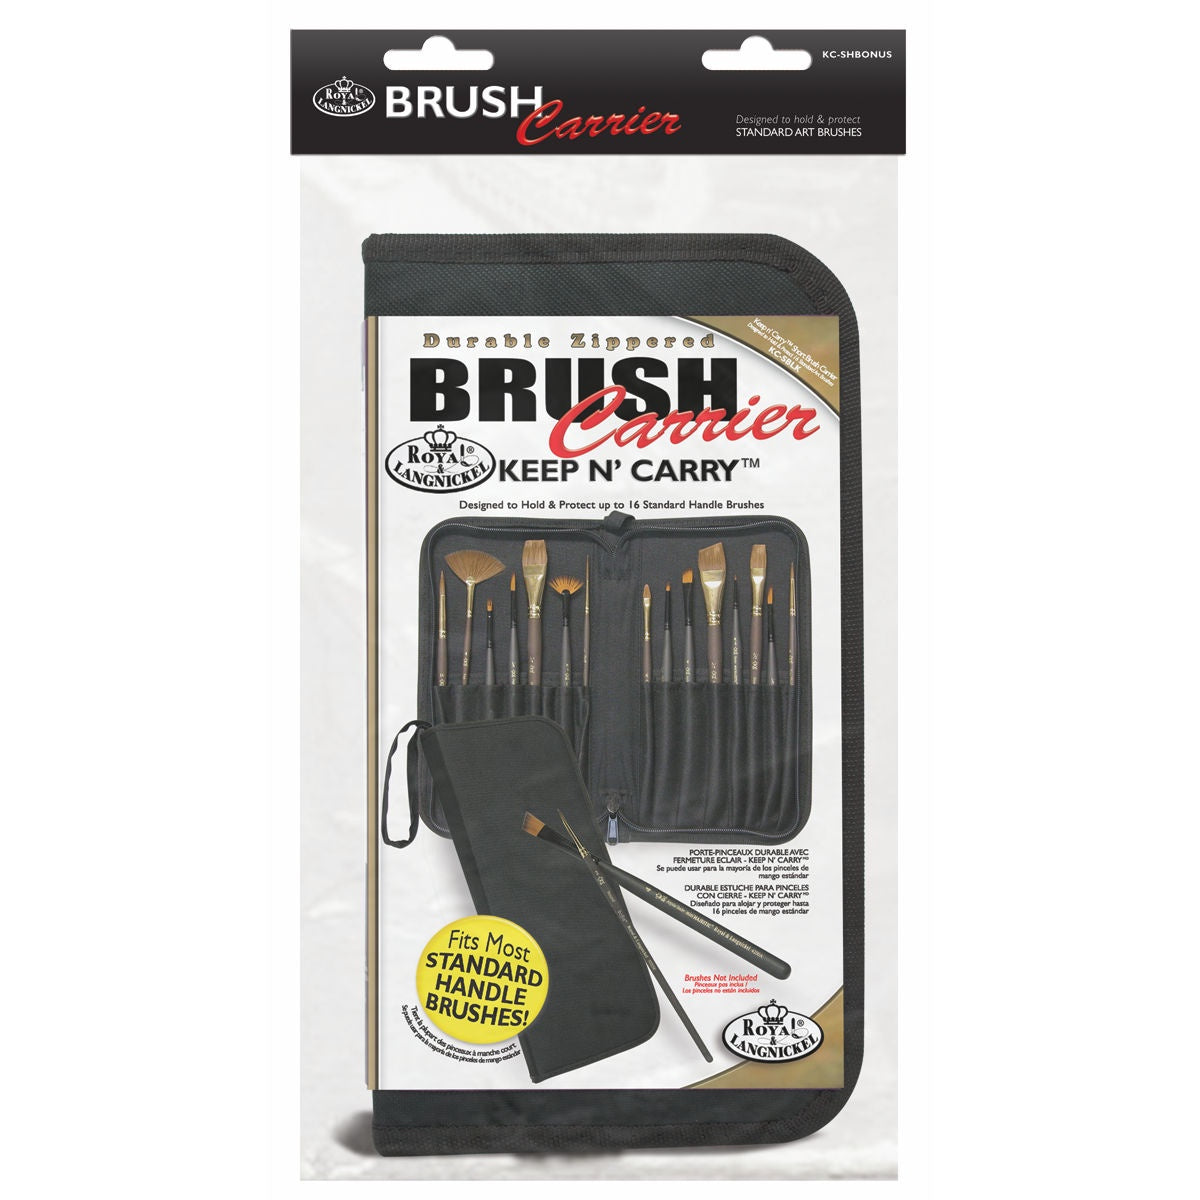 Zippered Brush Carrier Case Holds & Protects 16 Standard Handle Brushes